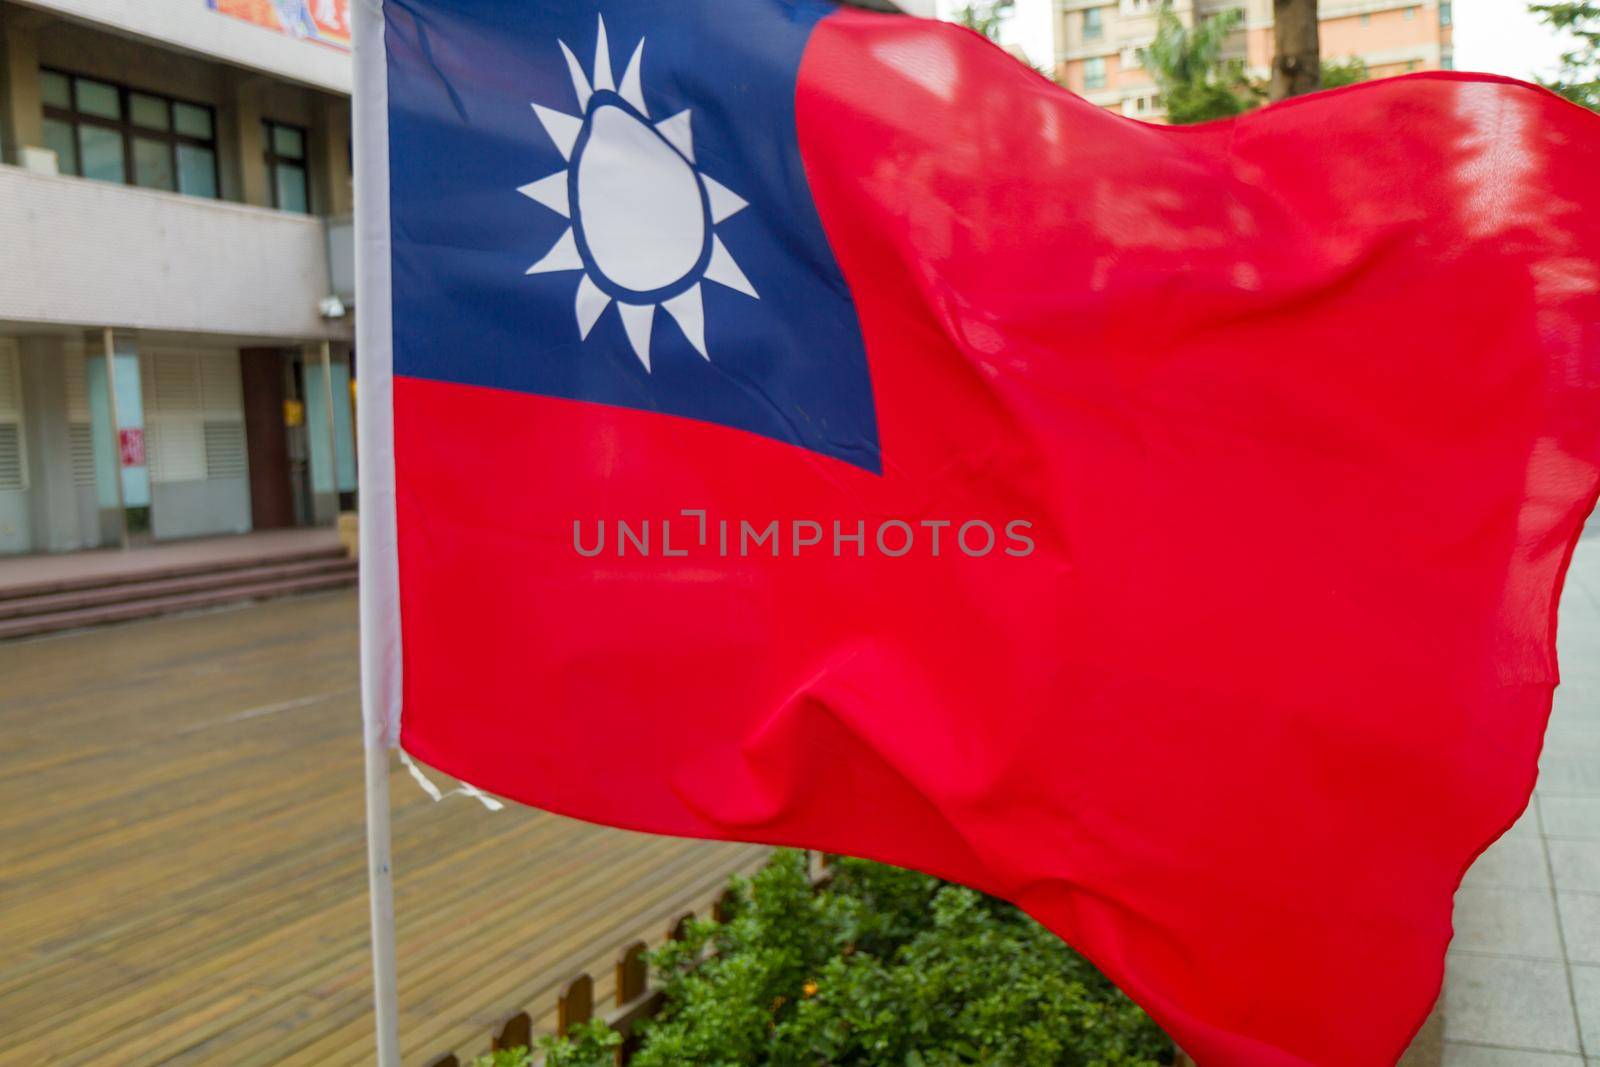 Taiwan Republic of China flags blowing in wind